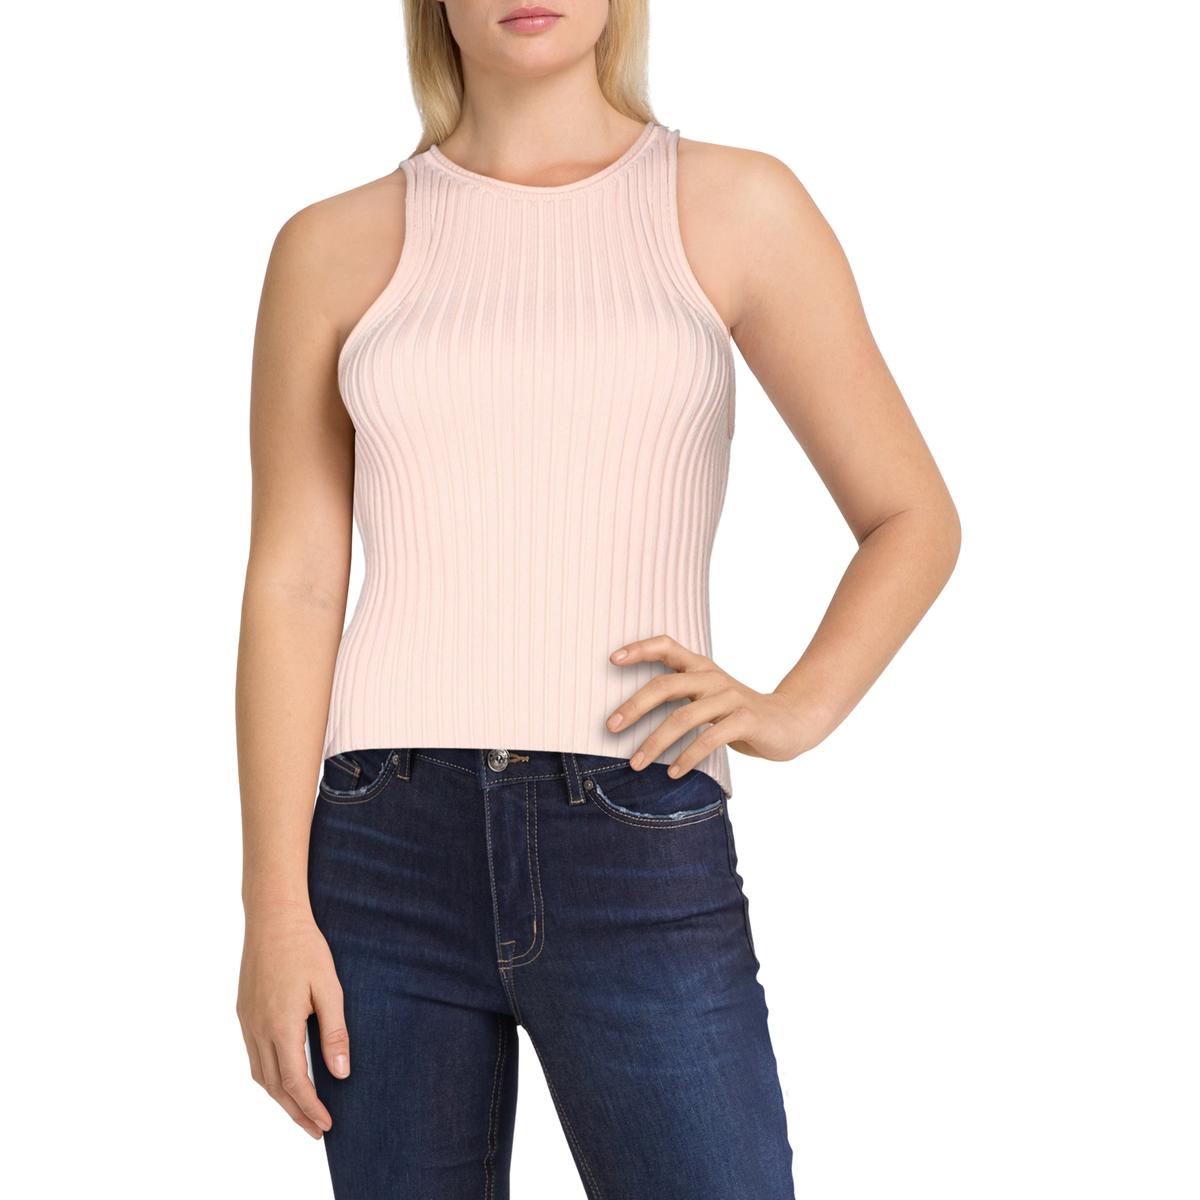 Frame Womens Palm Ivory Cotton Embroidered Tee Tank Top Shirt XS BHFO 9629